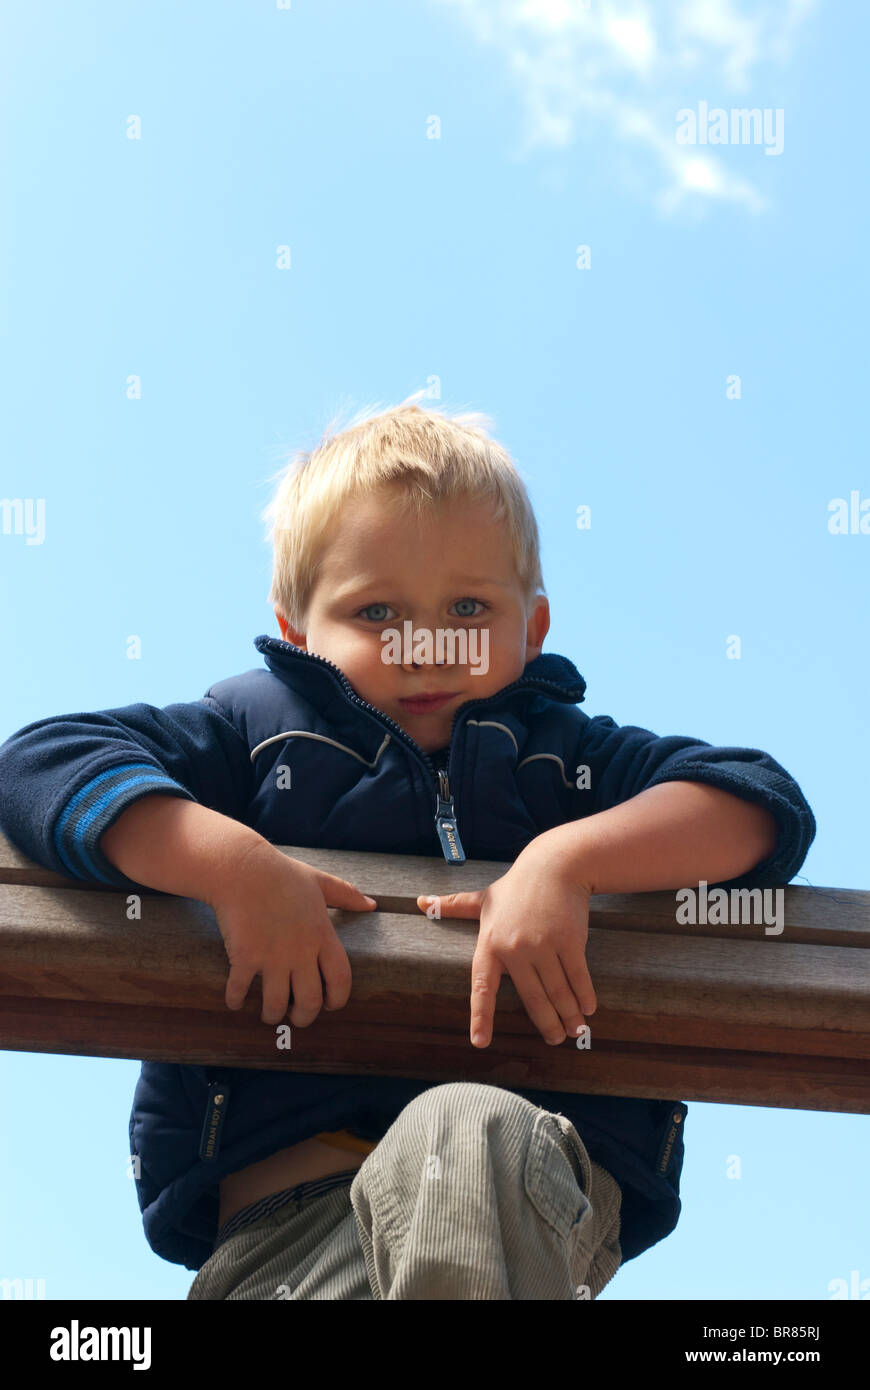 A young blond boy 4 years on a summer playground Stock Photo